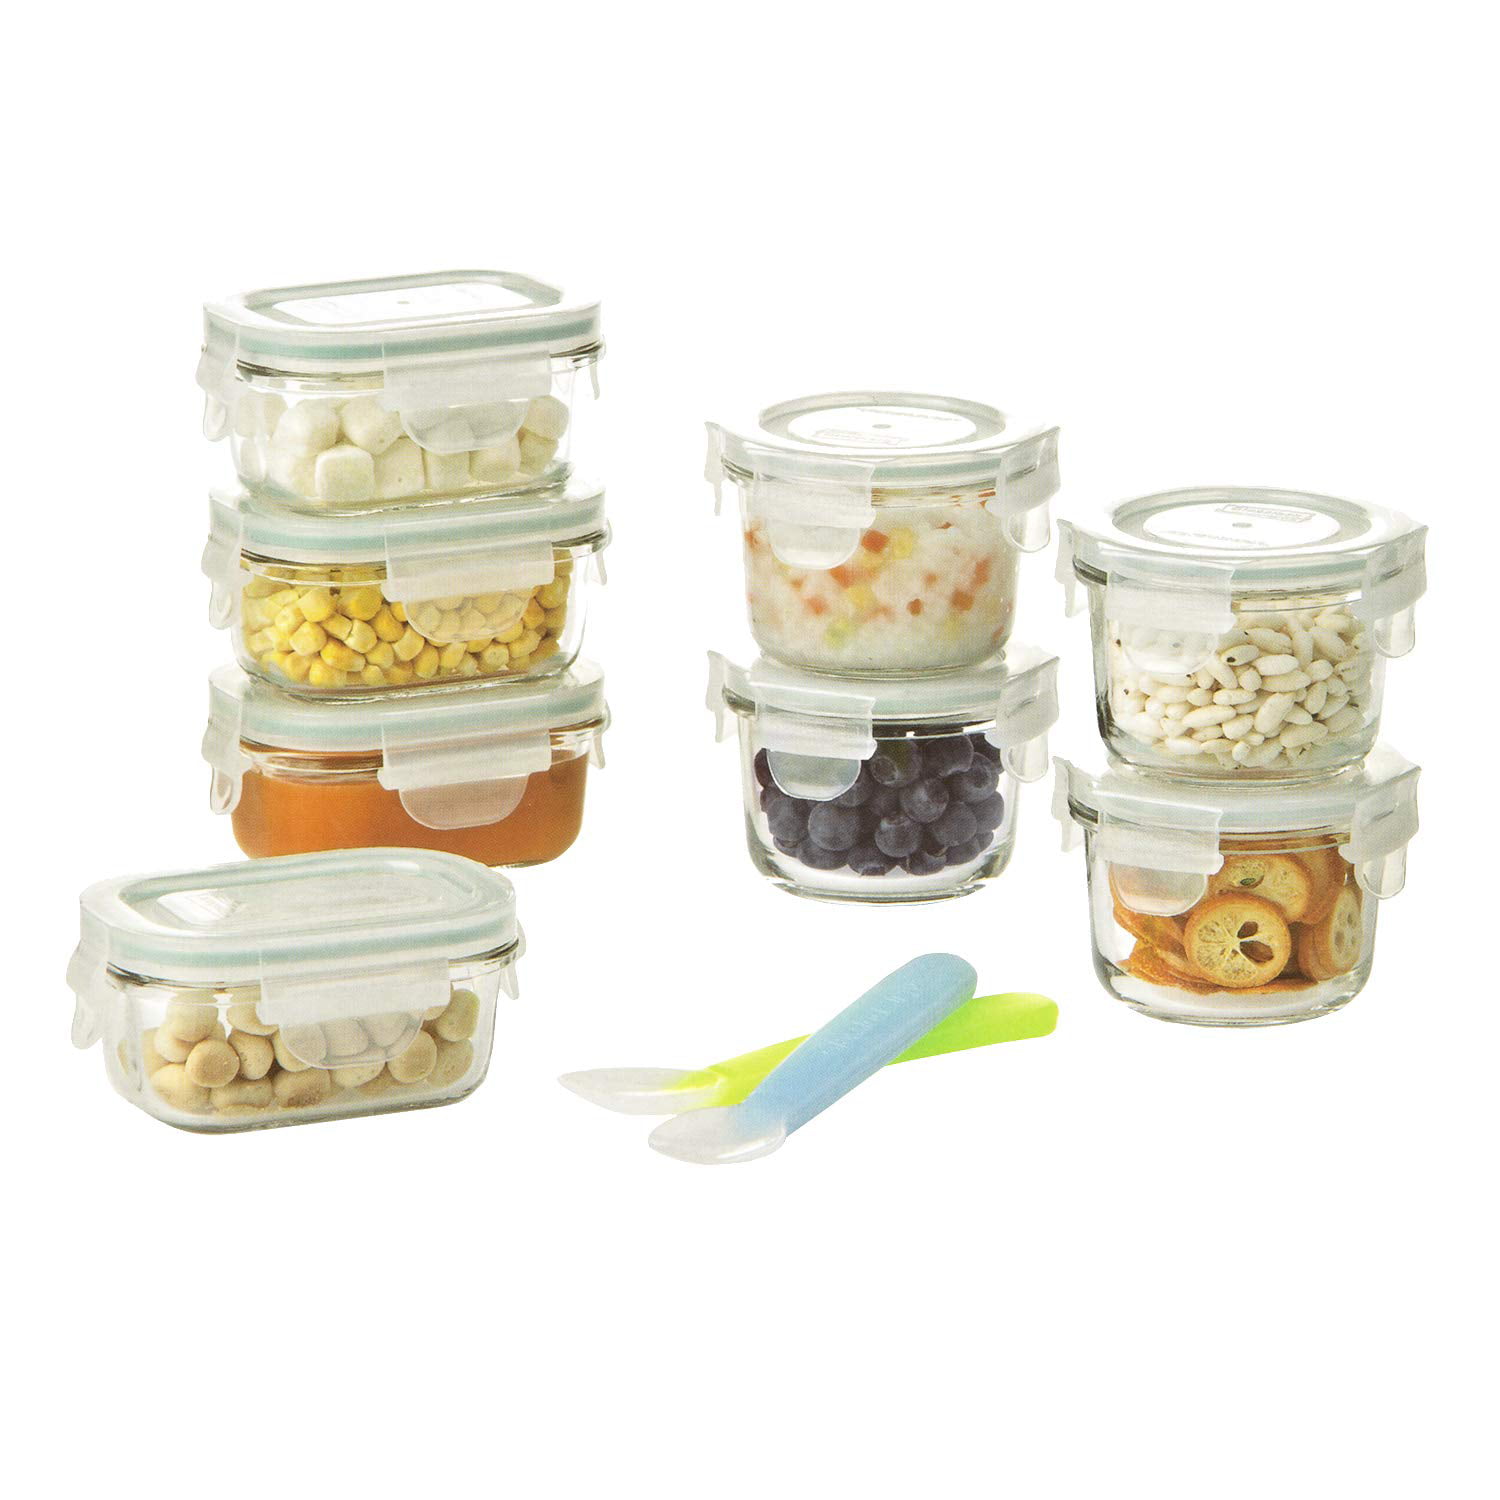 18 pcs Glasslock Baby Food Glass Container Set 